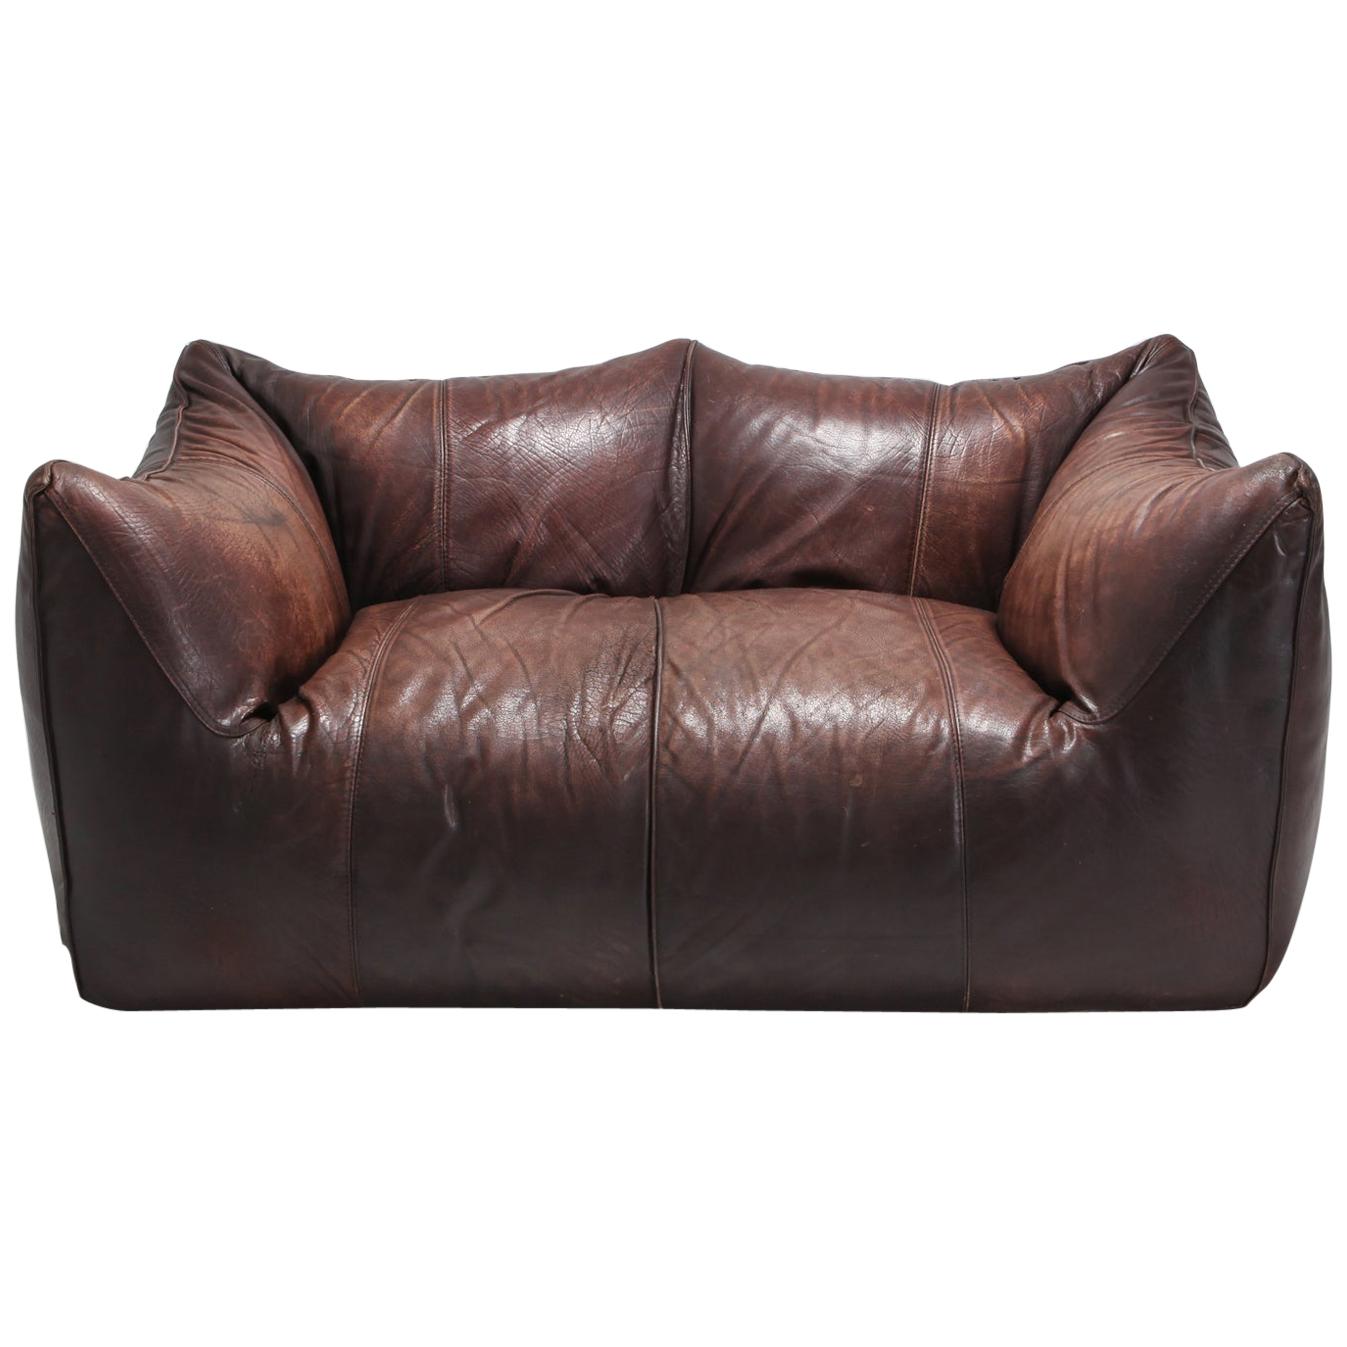 Bambole First Edition by Mario Bellini in Brown Leather